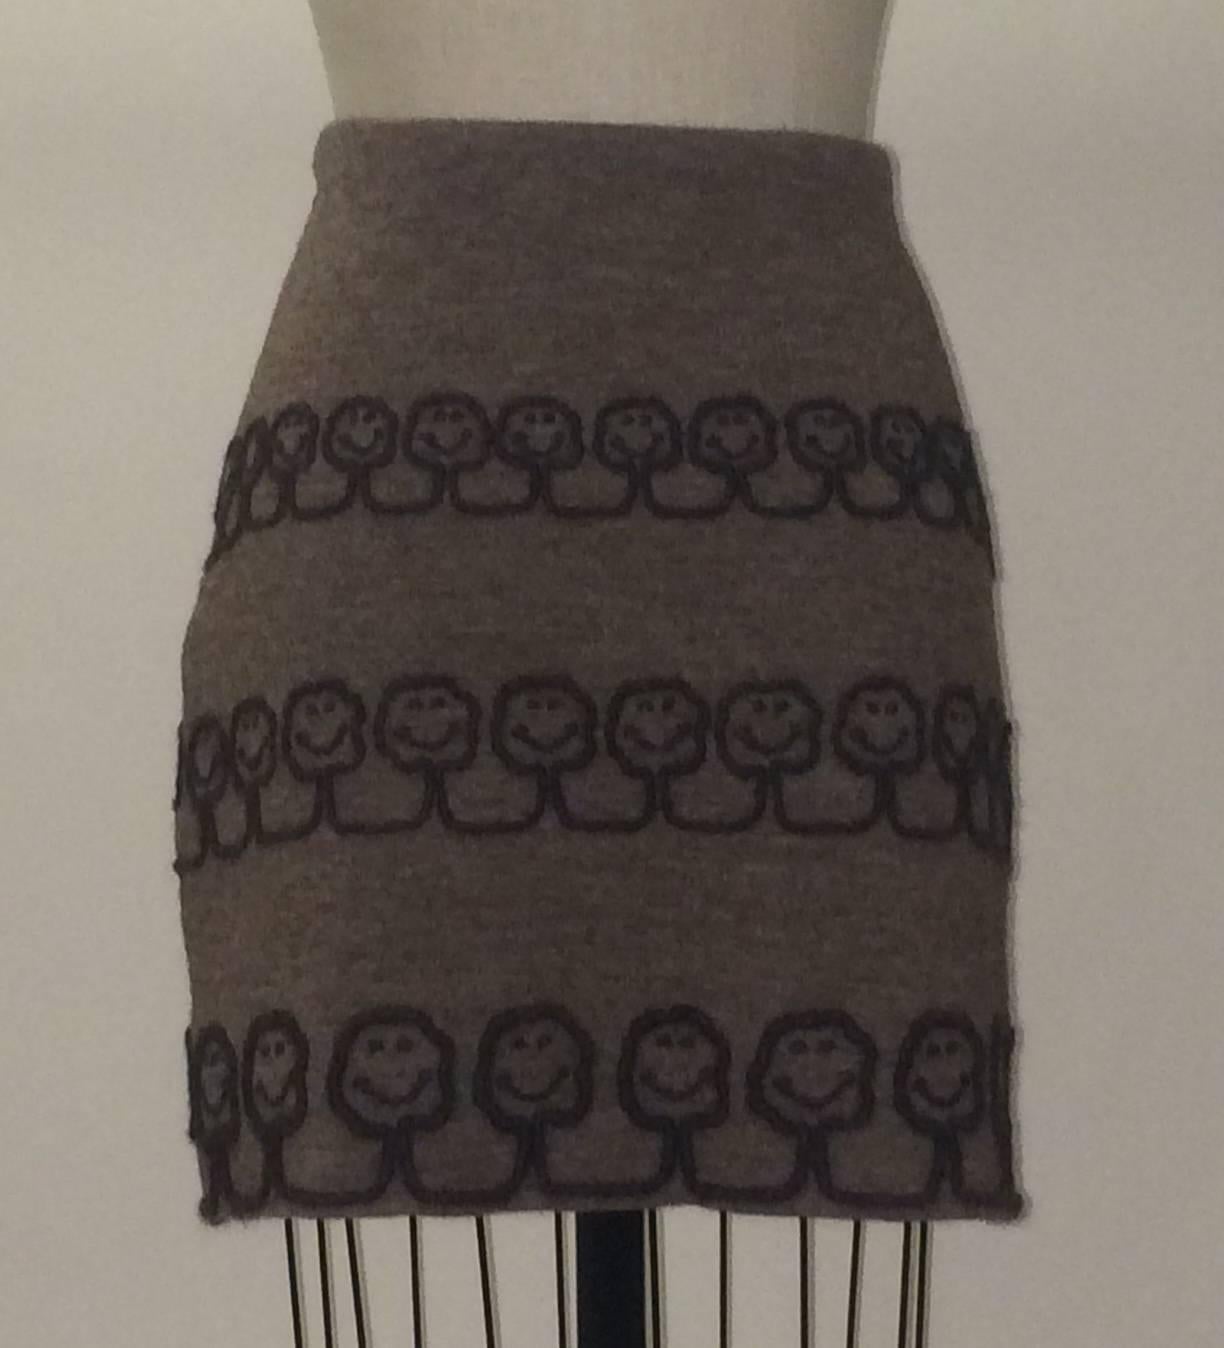 Moschino light brown knit skirt with dark brown smiling trees appliquéd in yarn from Eco-Couture, Moschino's 'Nature Friendly Garment' line, unveiled in Franco's last collection. Fully lined, side zip.

100% wool.
Fully lined in 100% rayon. 

Made